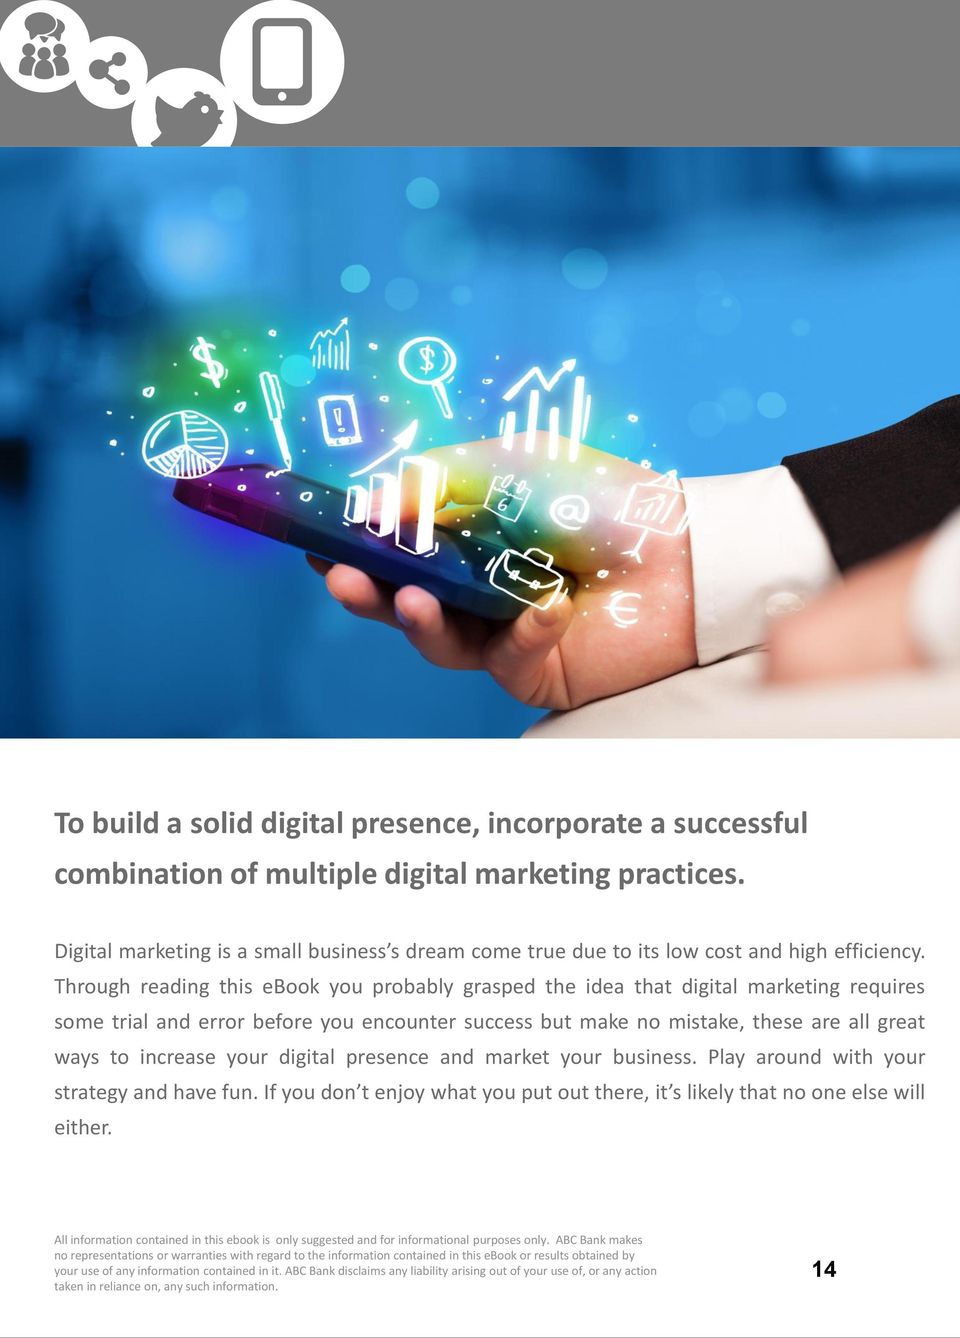 Through reading this ebook you probably grasped the idea that digital marketing requires some trial and error before you encounter success but make no mistake, these are all great ways to increase